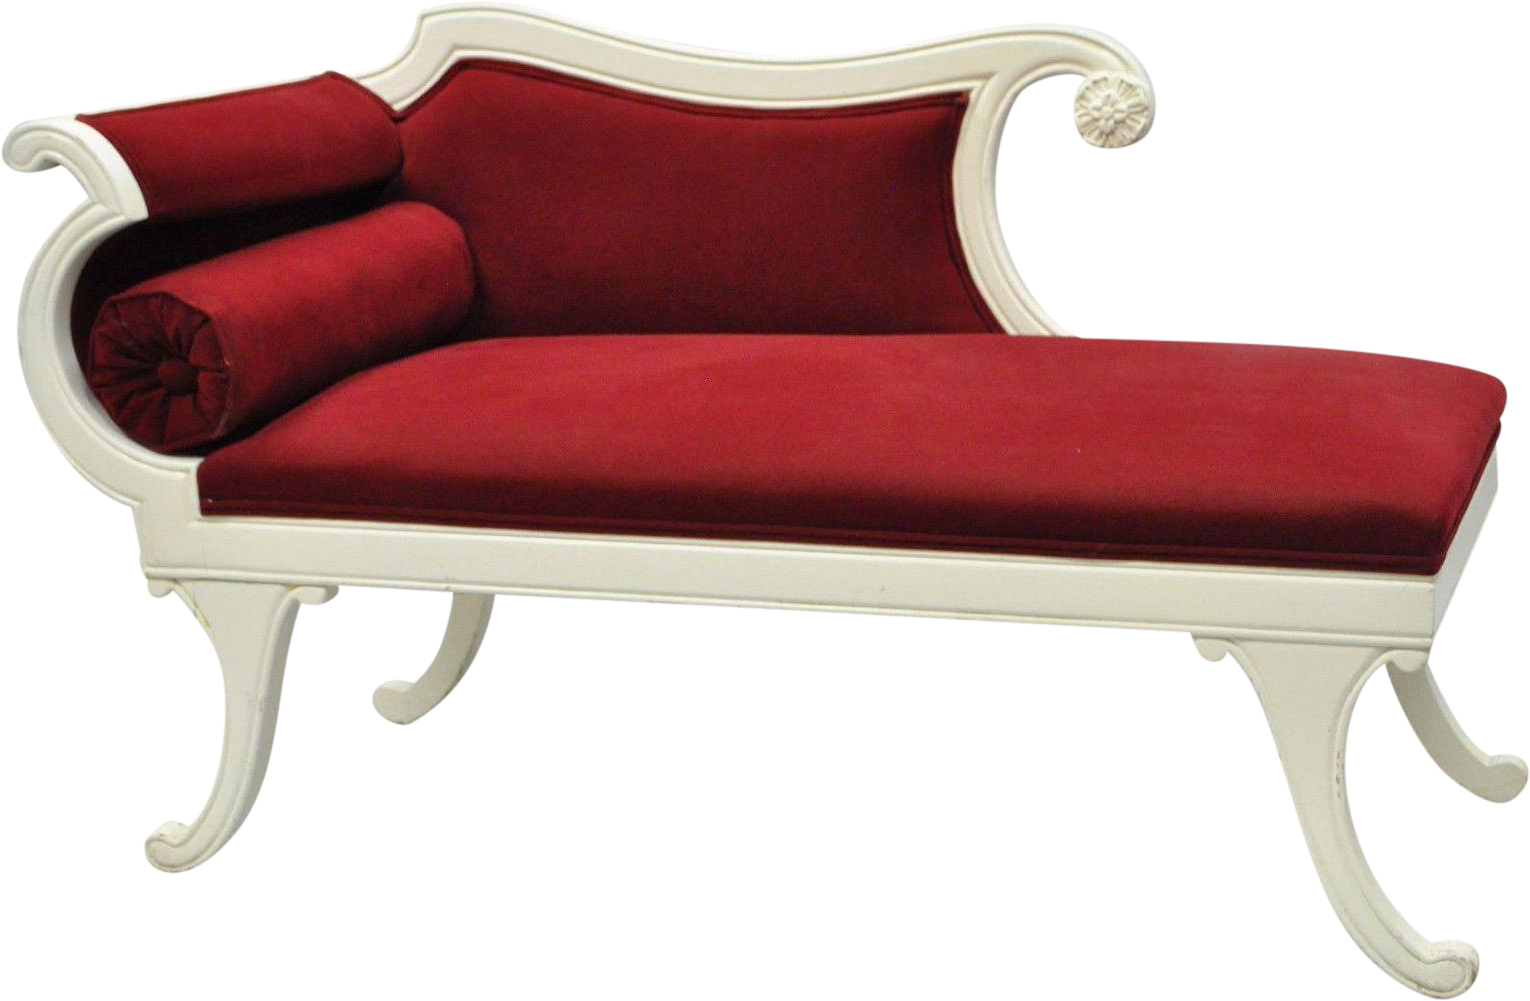 Red Chaise Longue